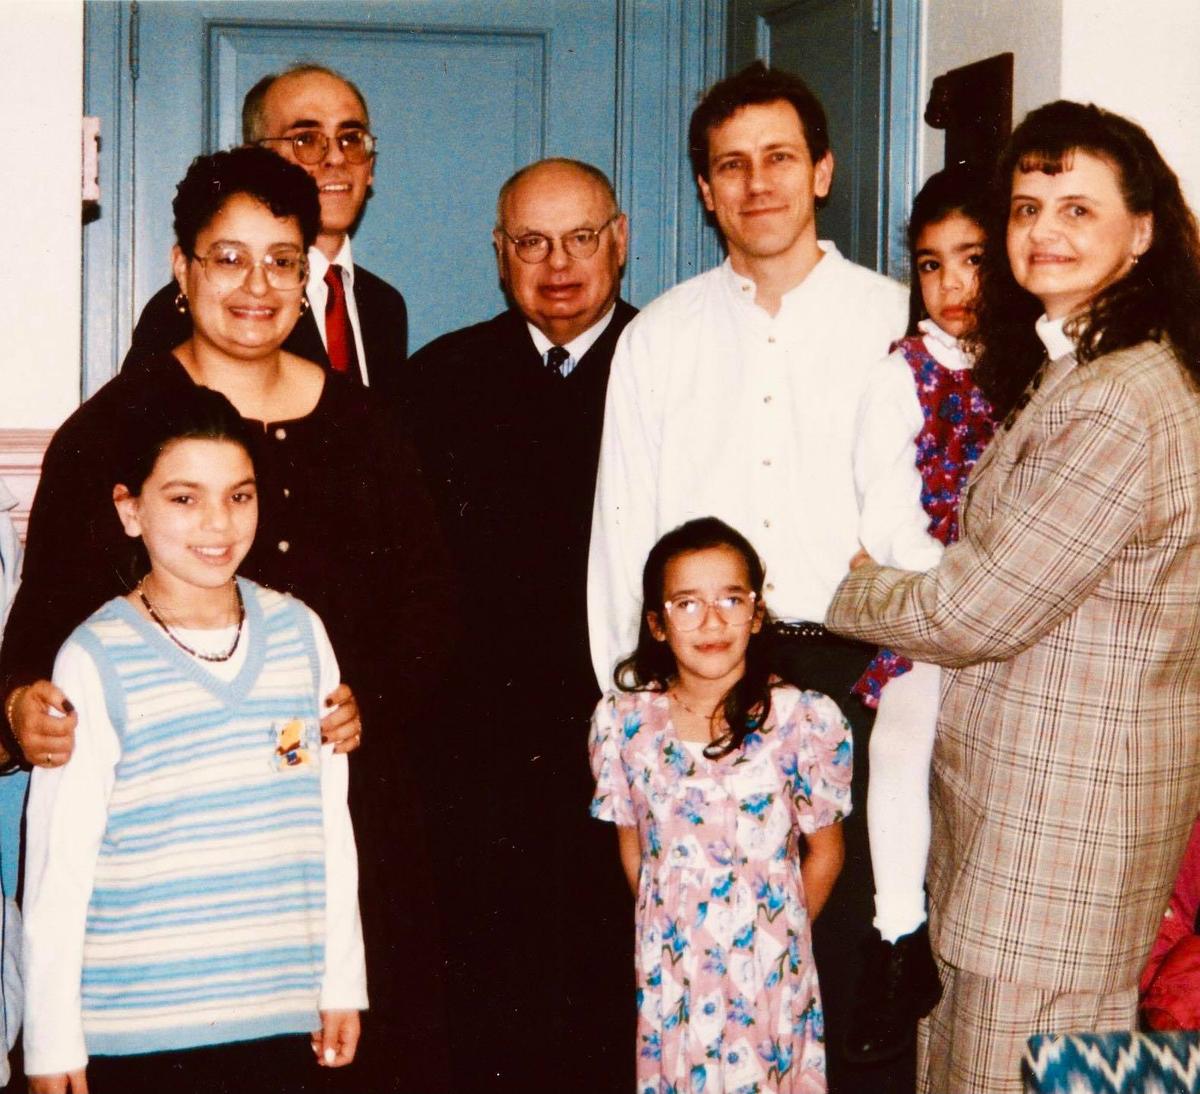 Amanda Joseph and her sisters with their adoptive family. (Courtesy of <a href="https://www.facebook.com/profile.php?id=510370479">Amanda Joseph</a>)